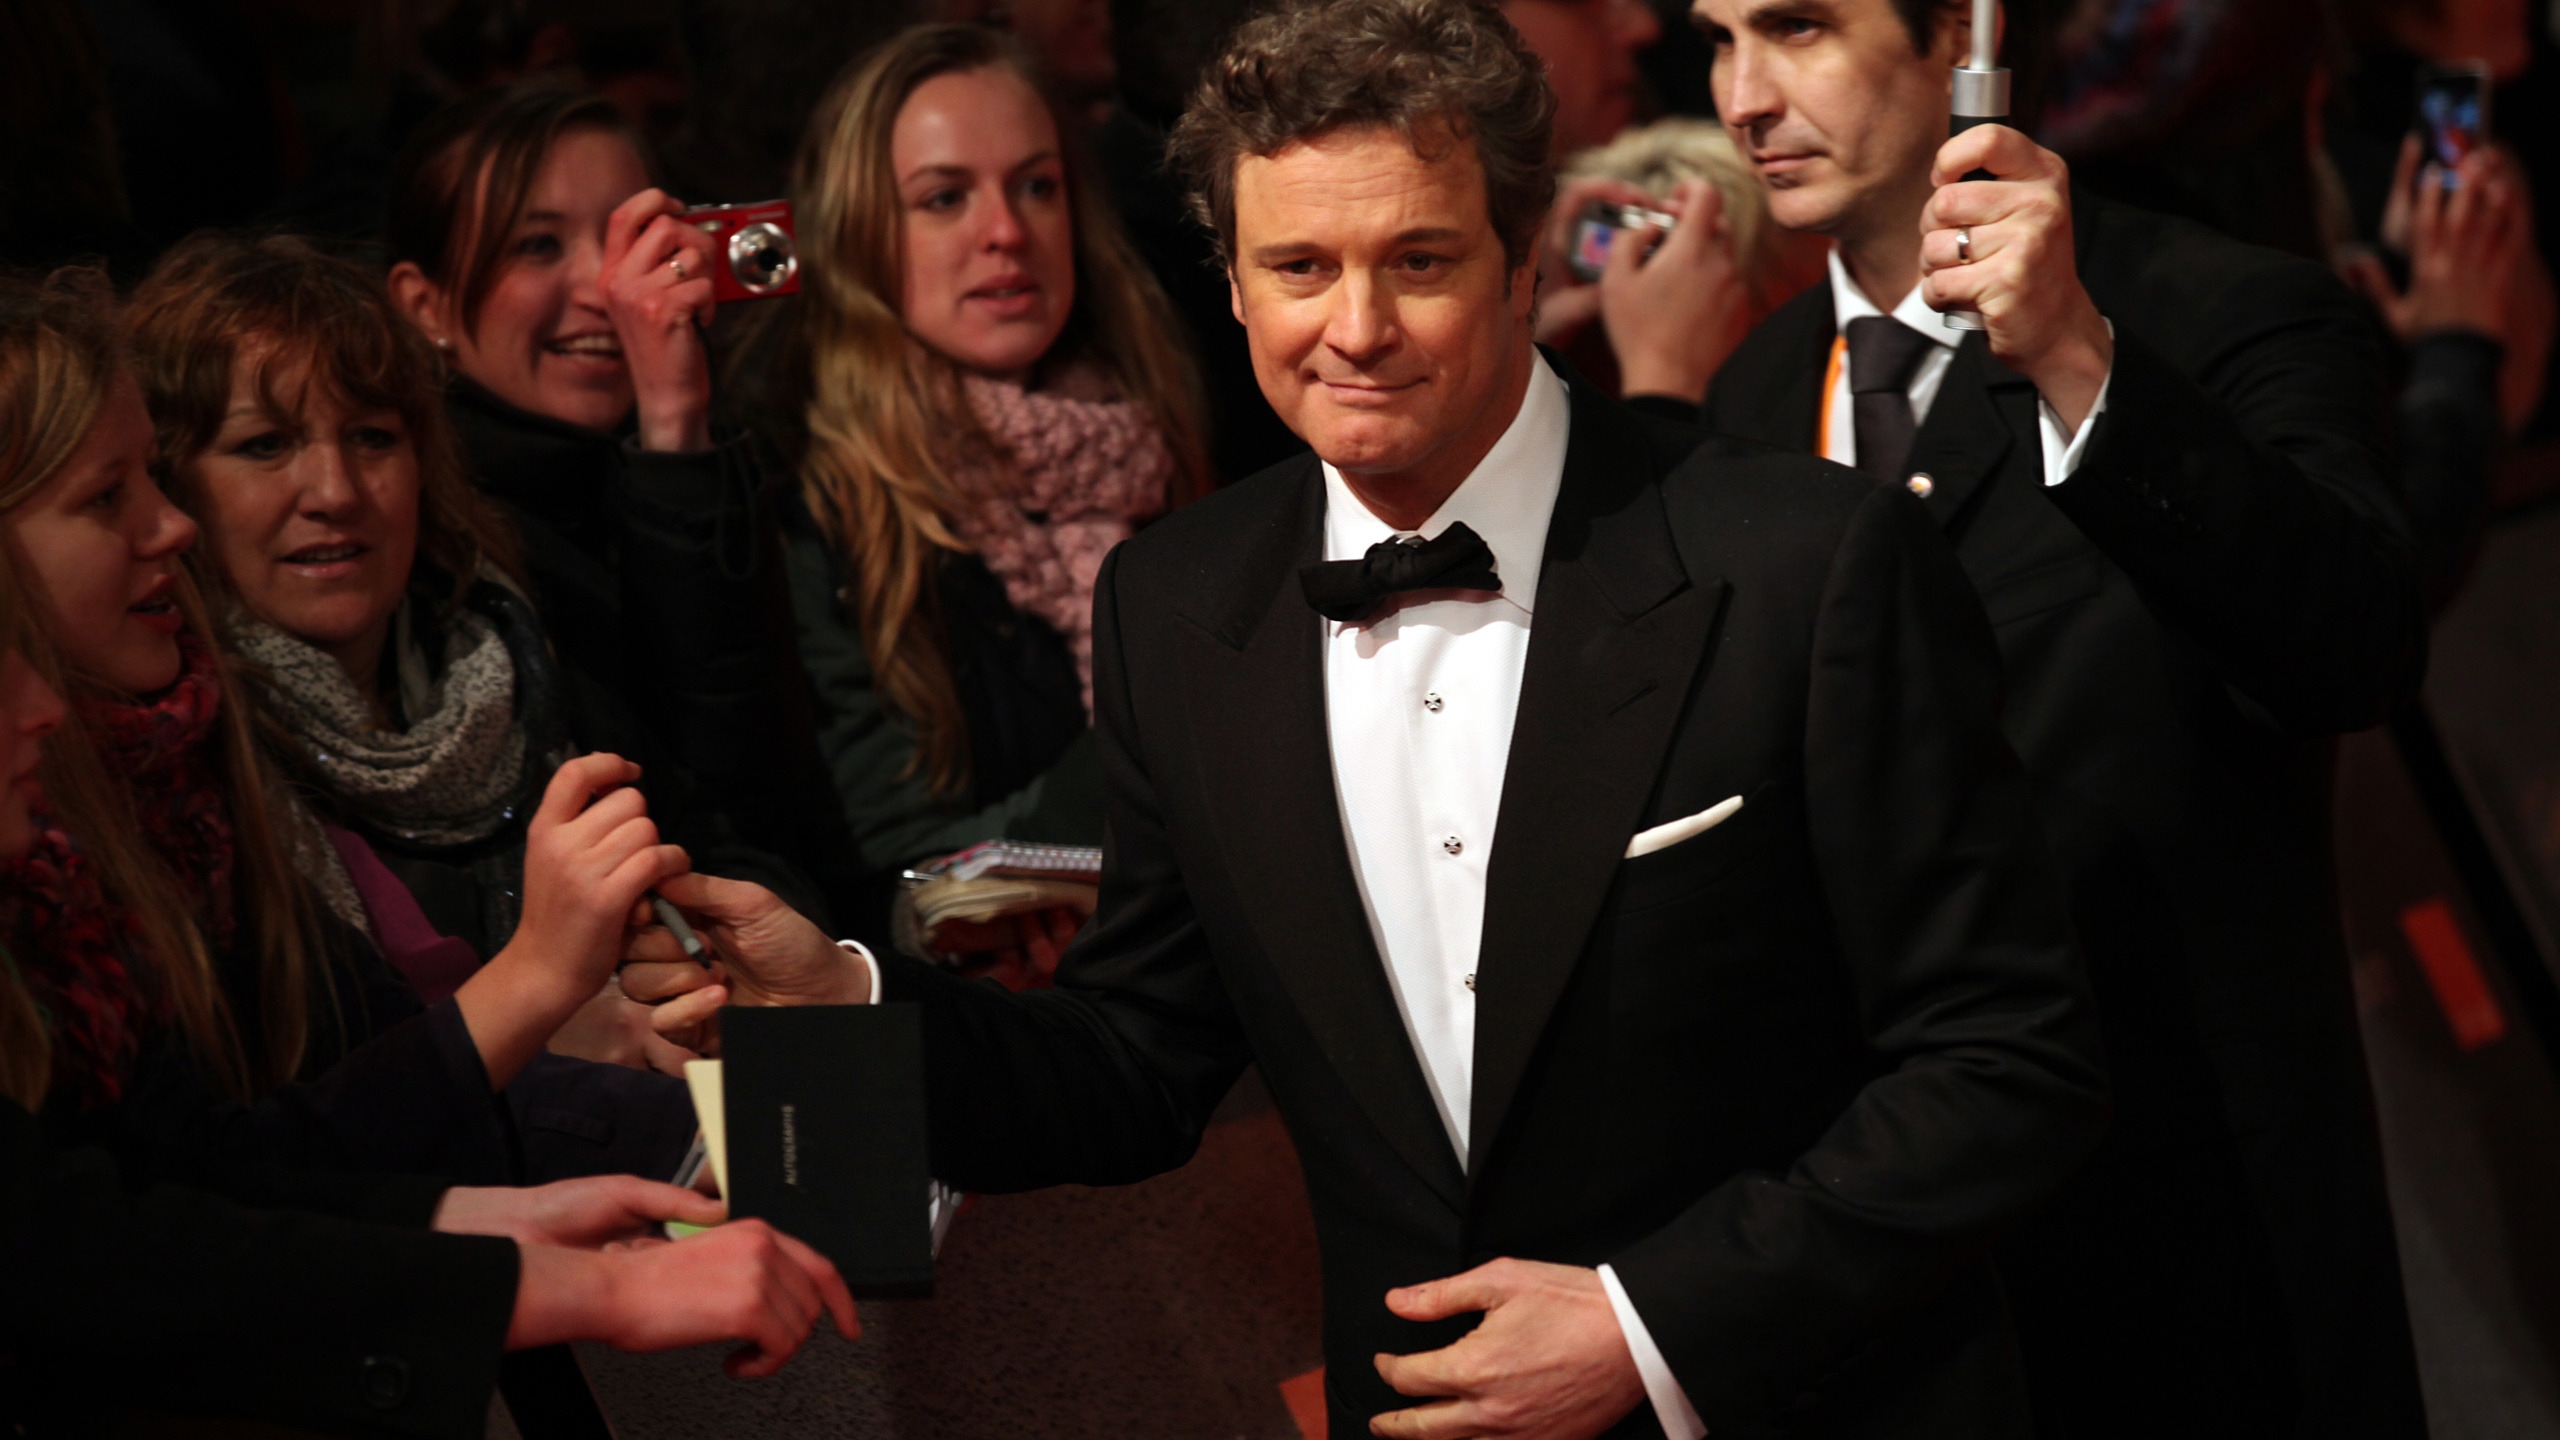 Colin Firth for 2560x1440 HDTV resolution